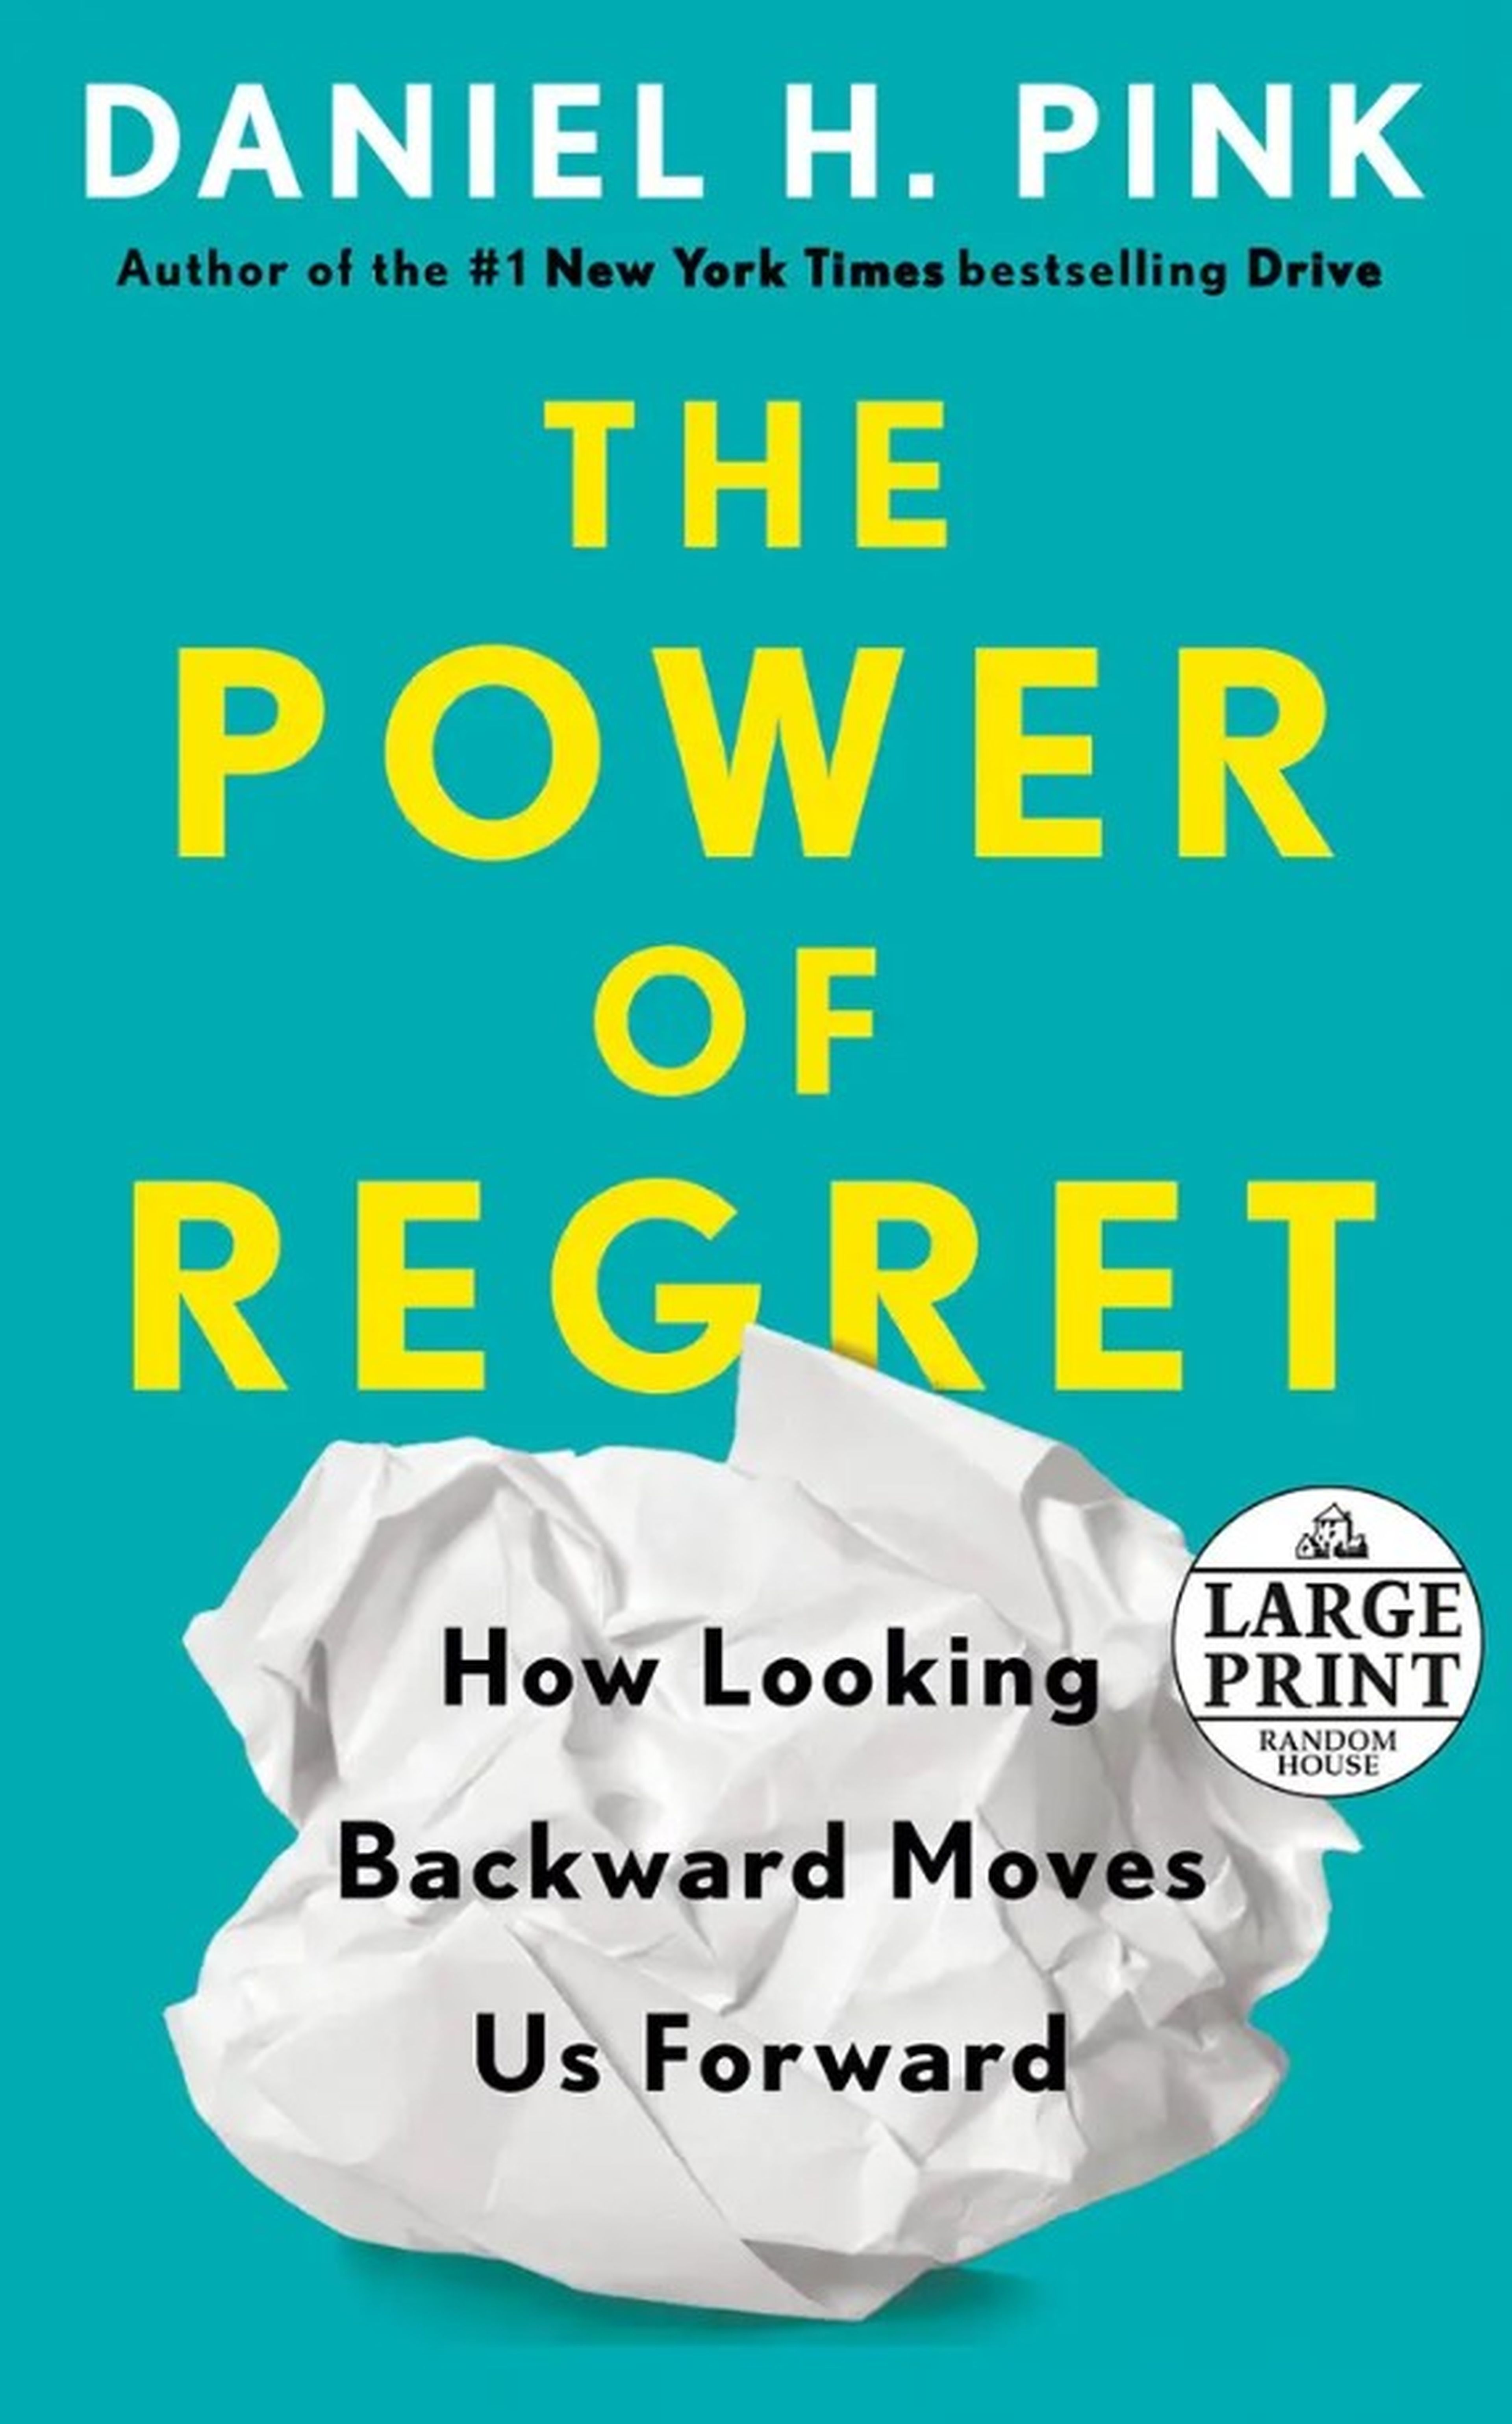 'The Power of Regret'